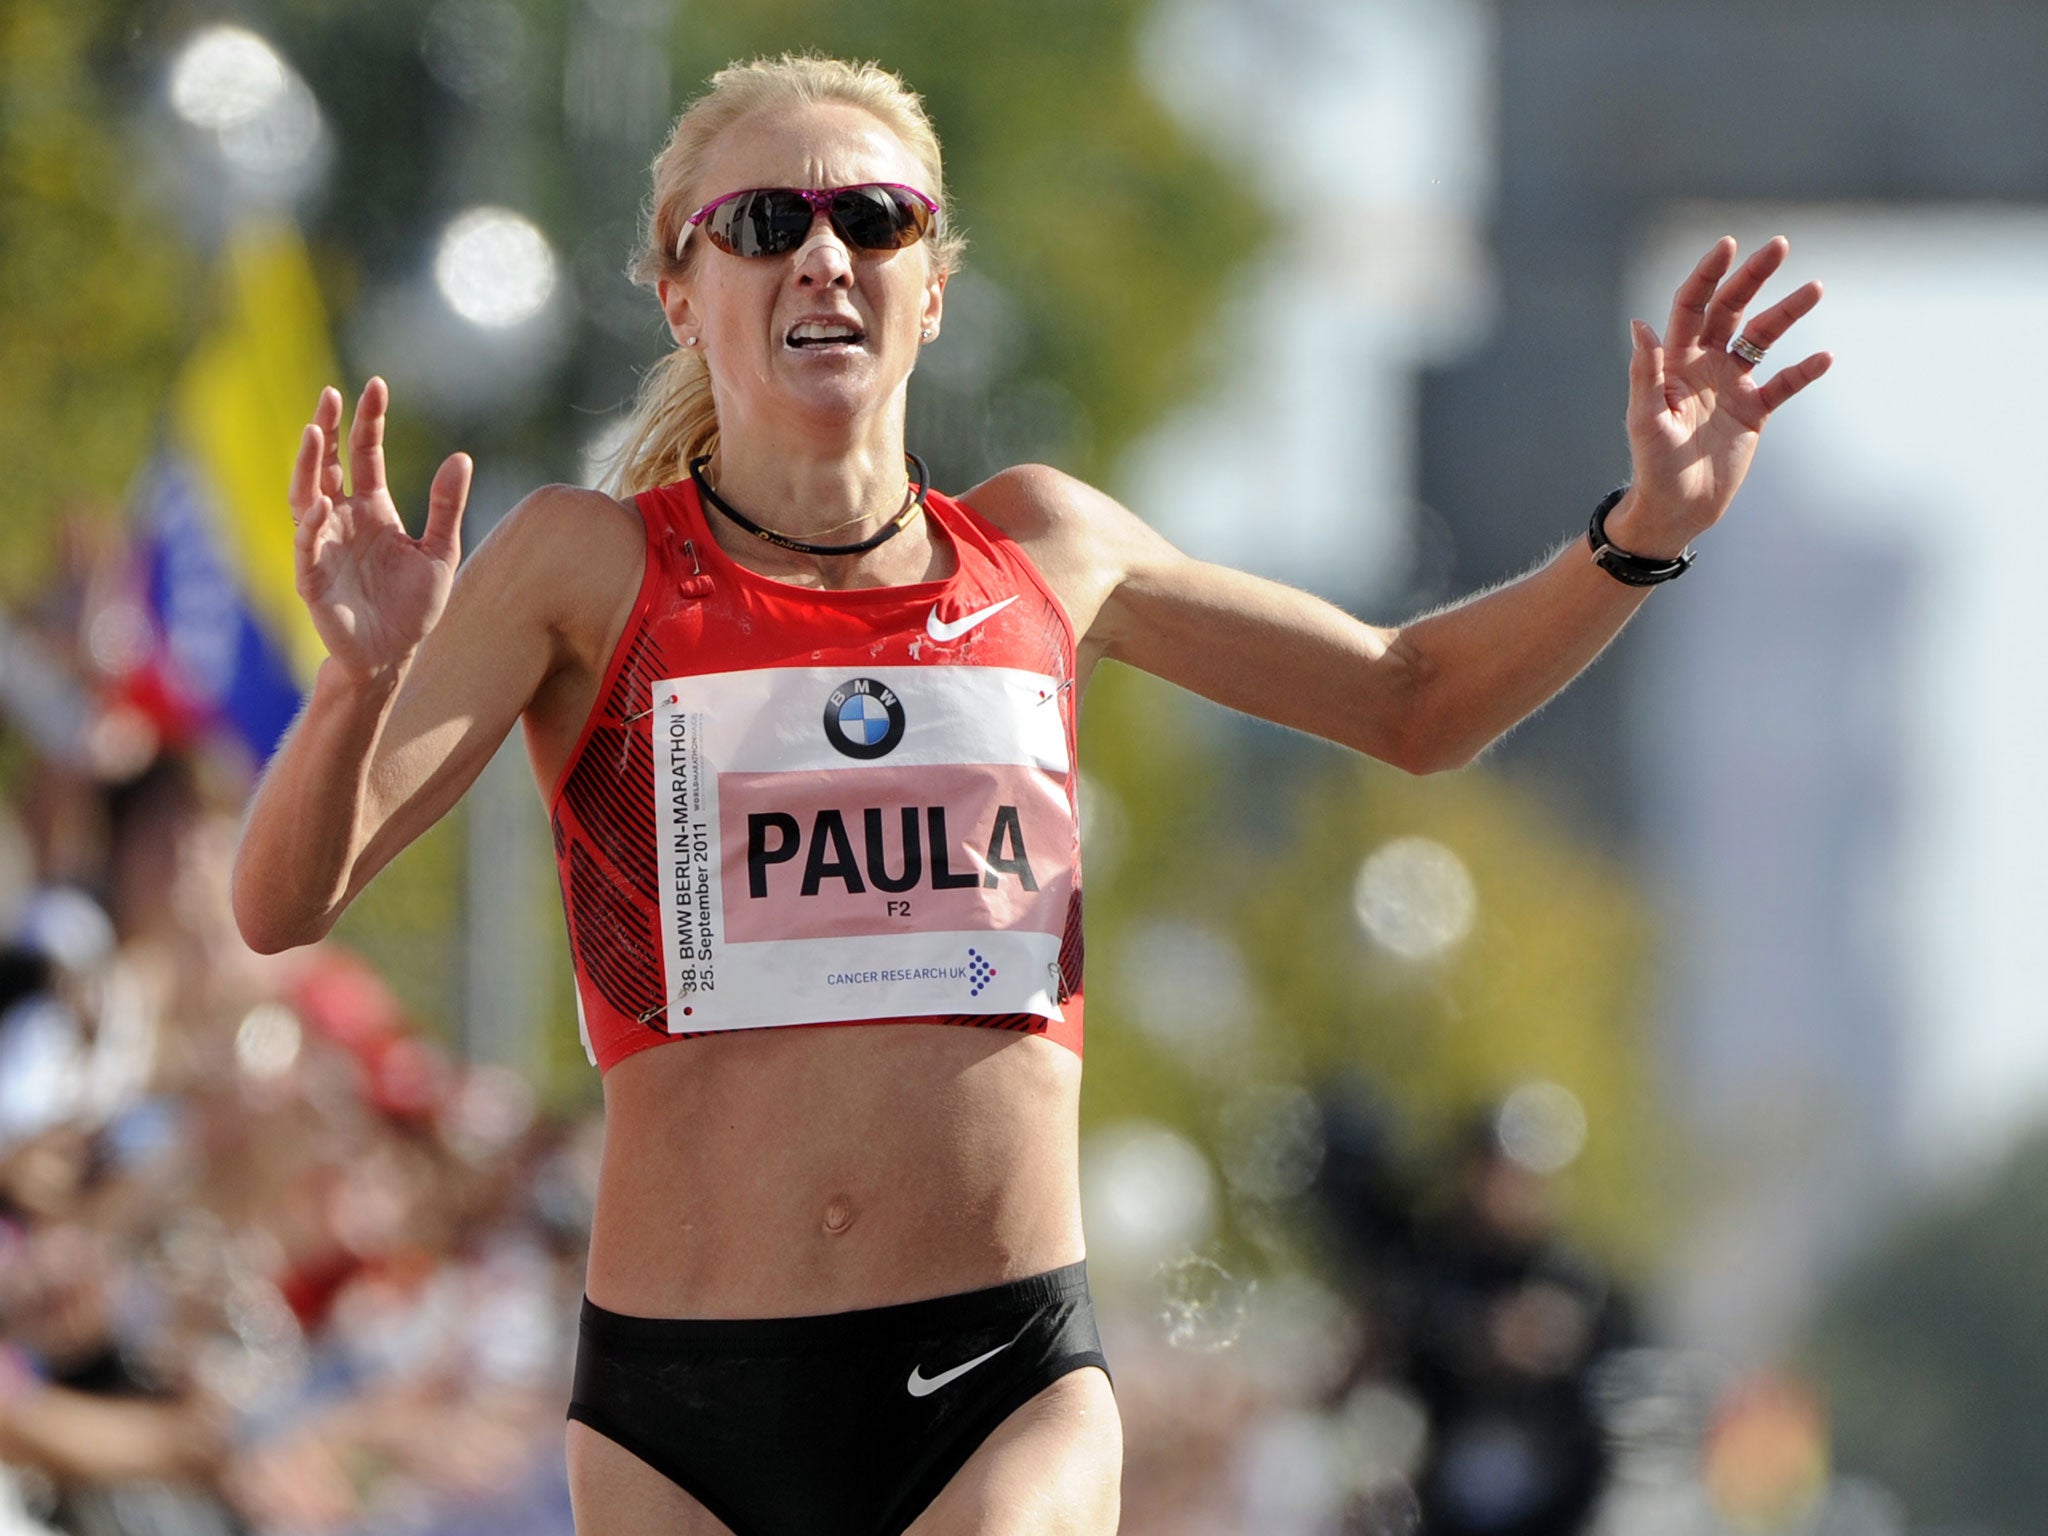 Paula Radcliffe has issued a statement to deny ever cheating during her career